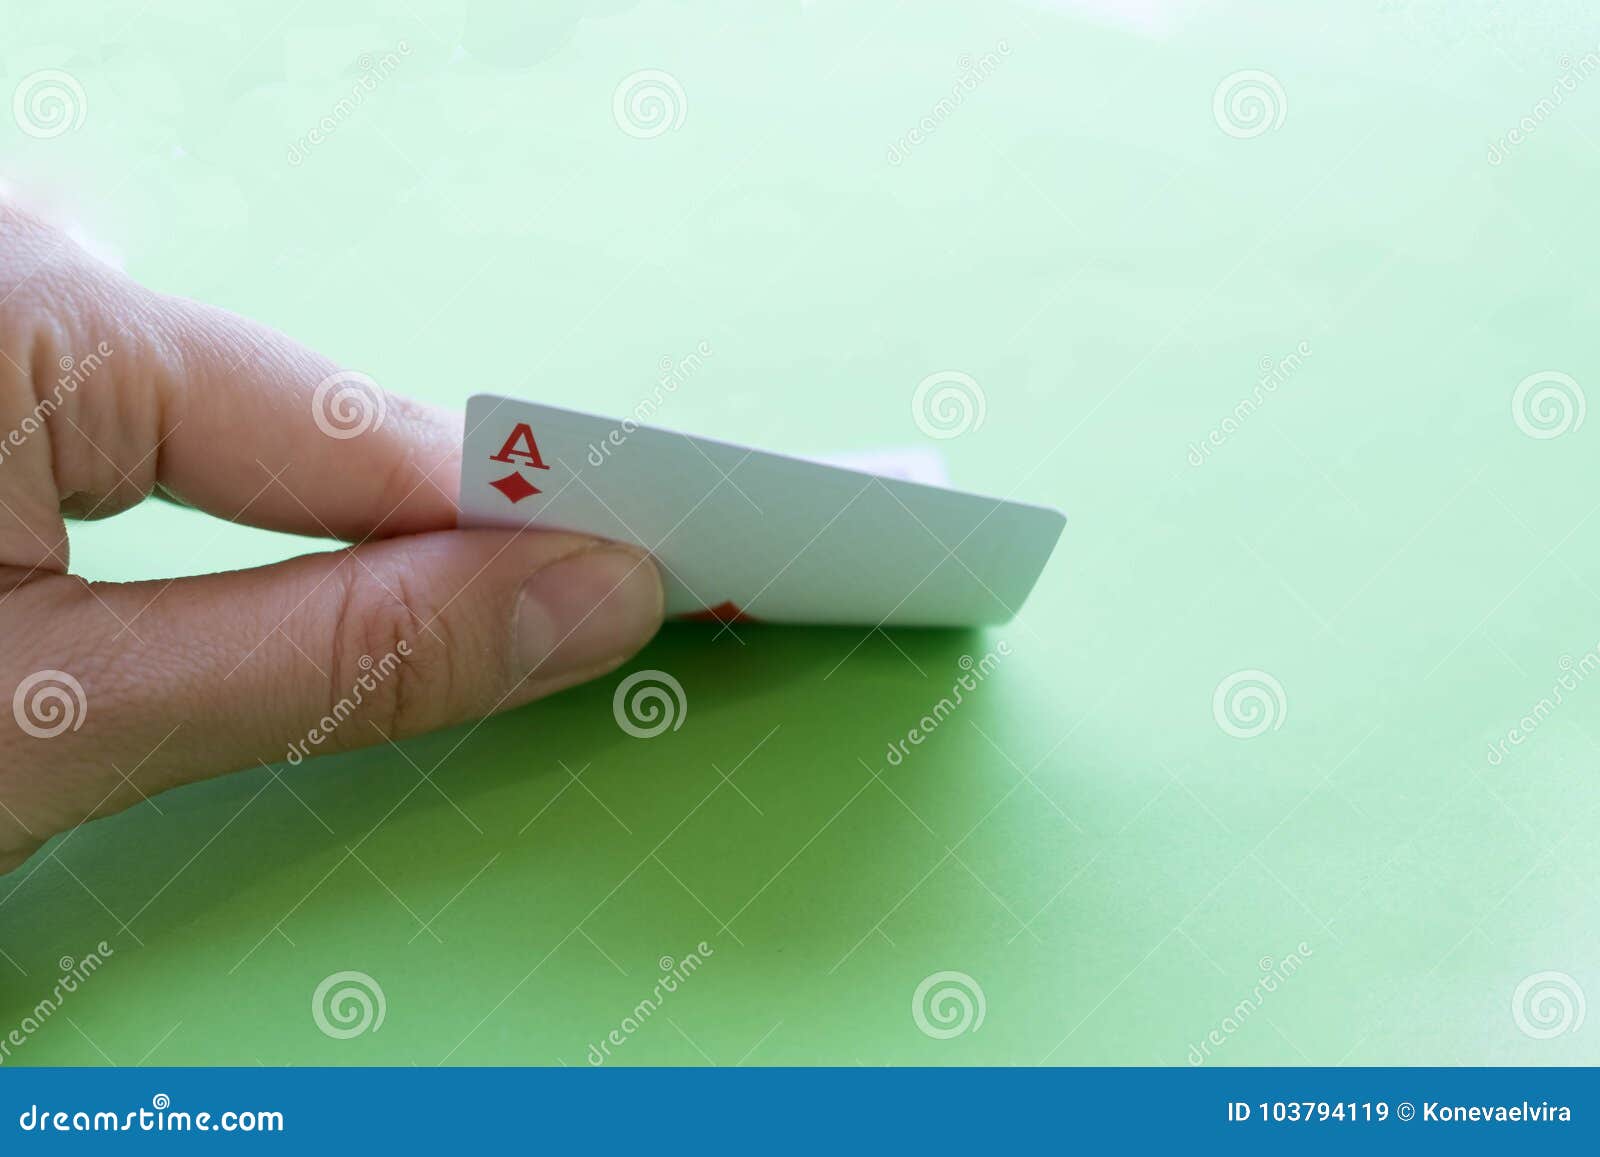 https://thumbs.dreamstime.com/z/hand-holds-last-card-ace-sleeve-poker-background-casino-game-gambling-lot-dusty-old-playing-cards-poker-103794119.jpg